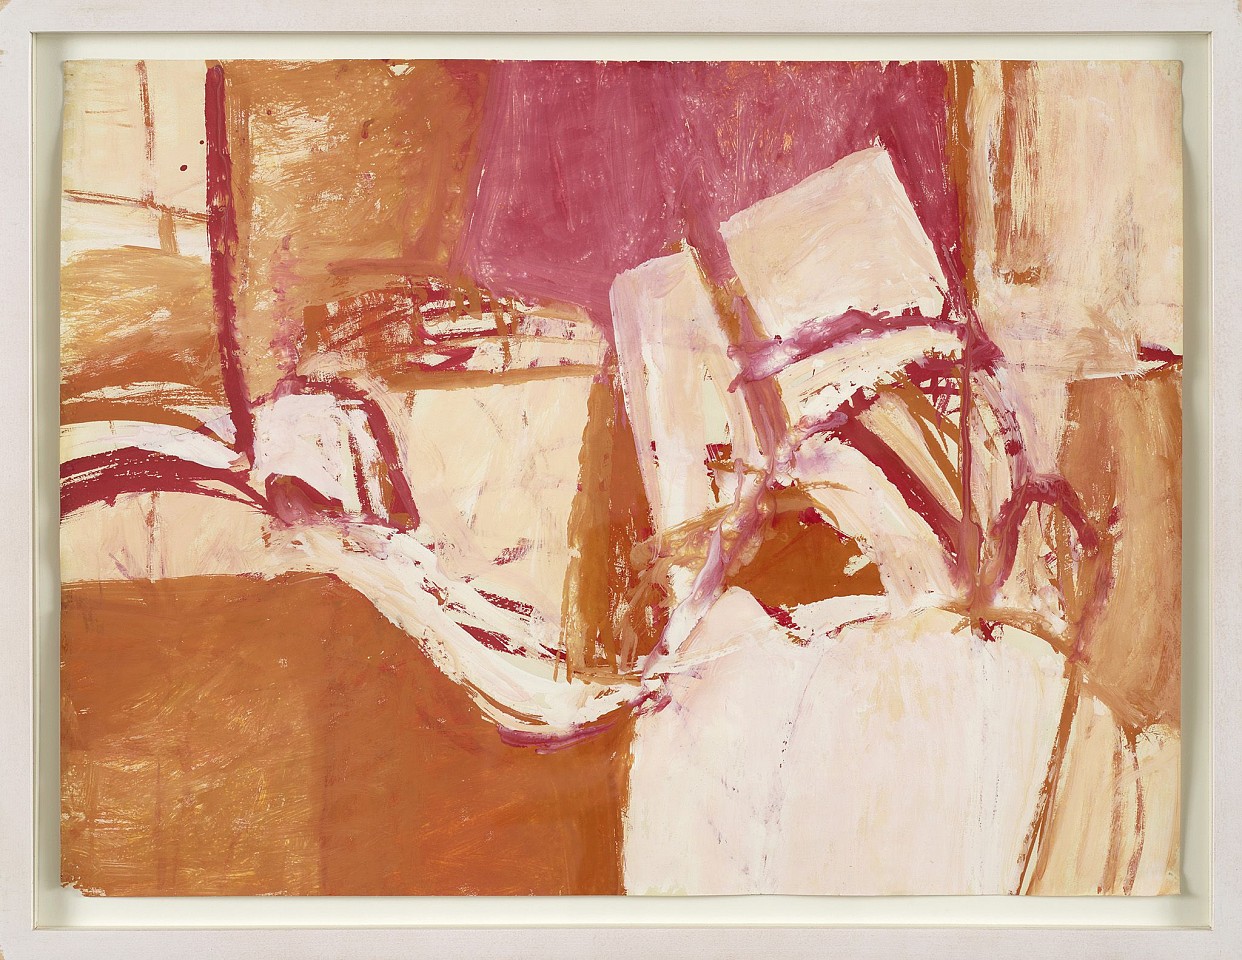 Charlotte Park, Untitled (Red, Orange, and White) | SOLD, c. 1955
18 x 24 in. (45.7 x 61 cm)
PAR-00011